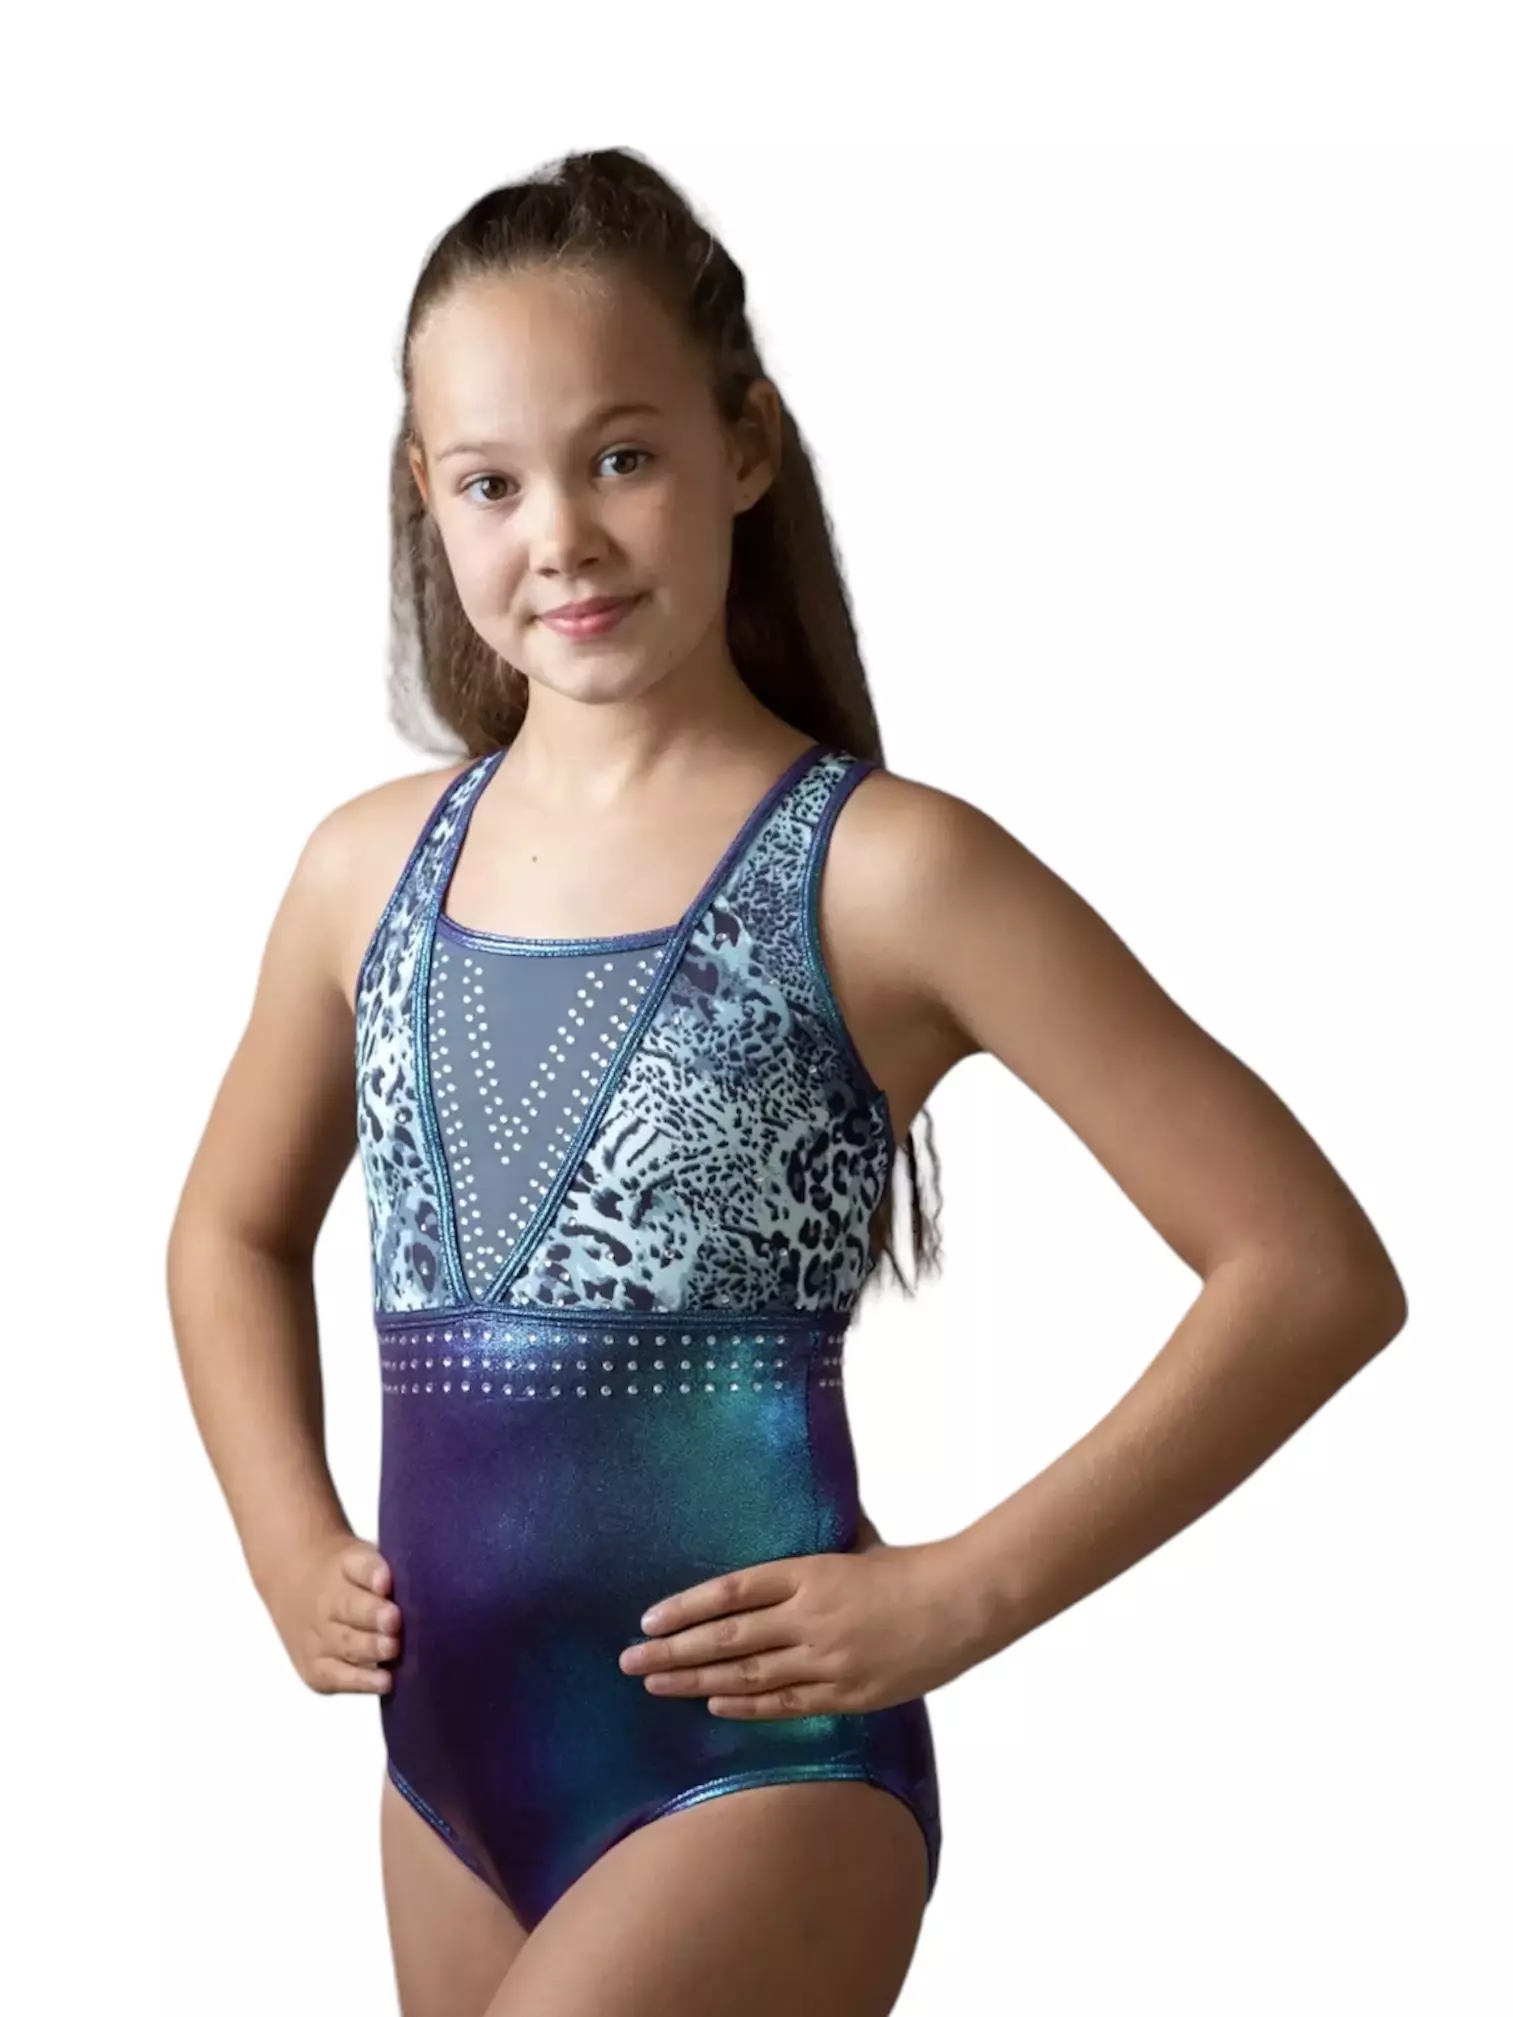 <p><strong><span style="color: rgb(0, 0, 0)">Darcy- Intuitive Leotard</span></strong></p>